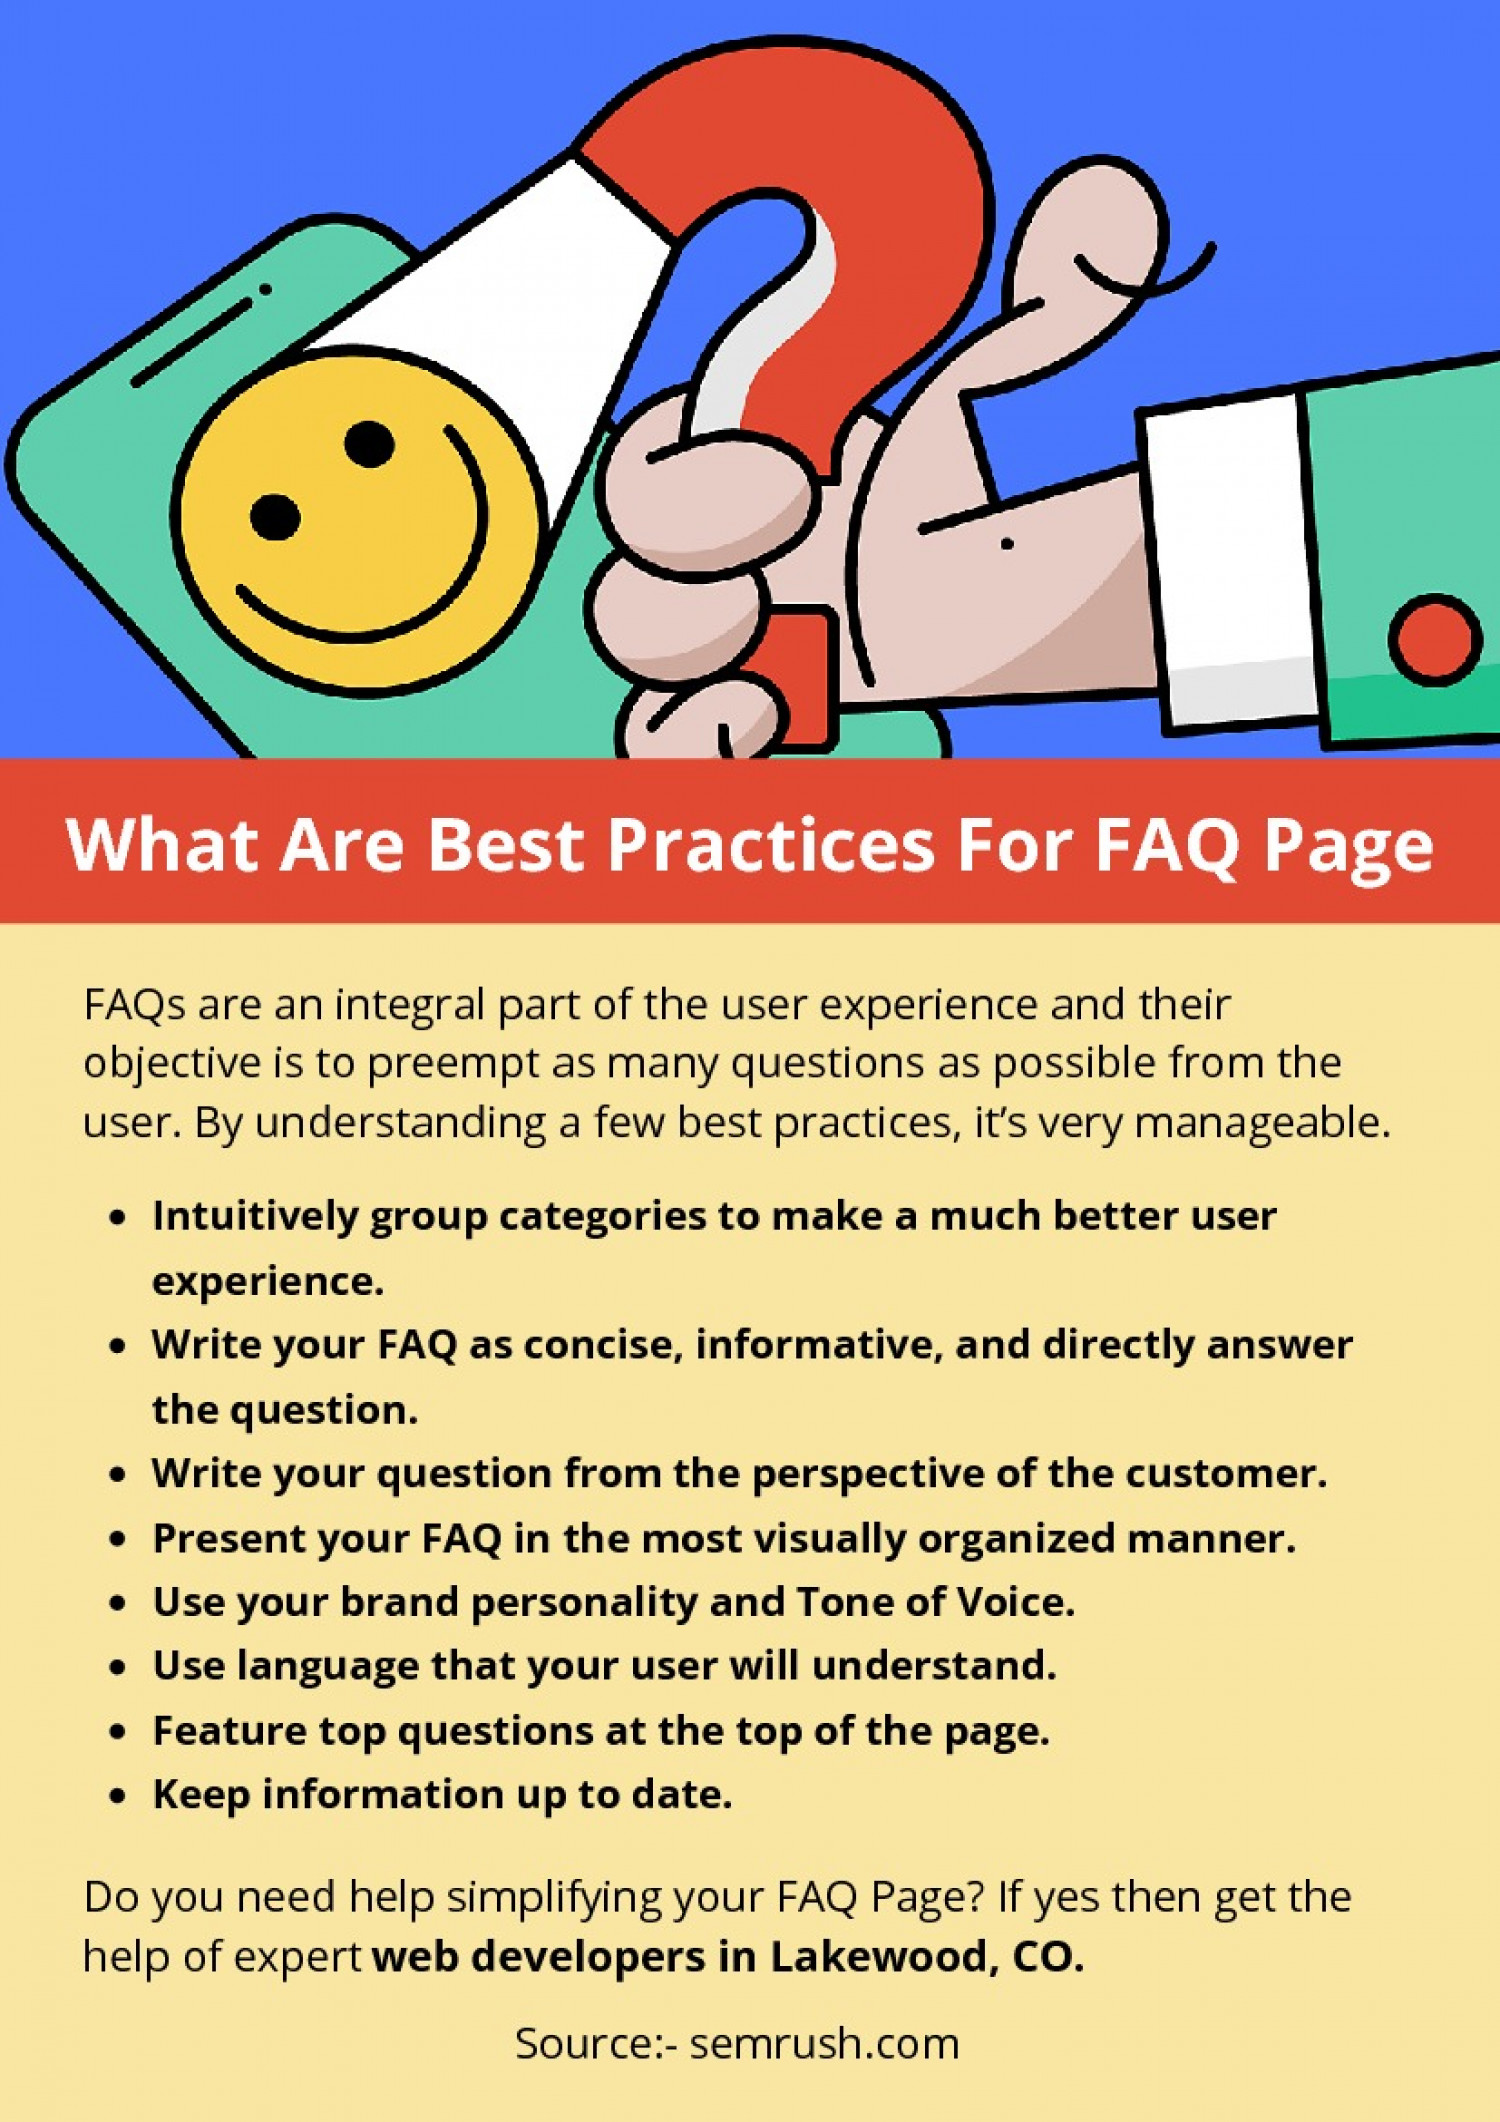 What Are Best Practices For FAQ Page Infographic